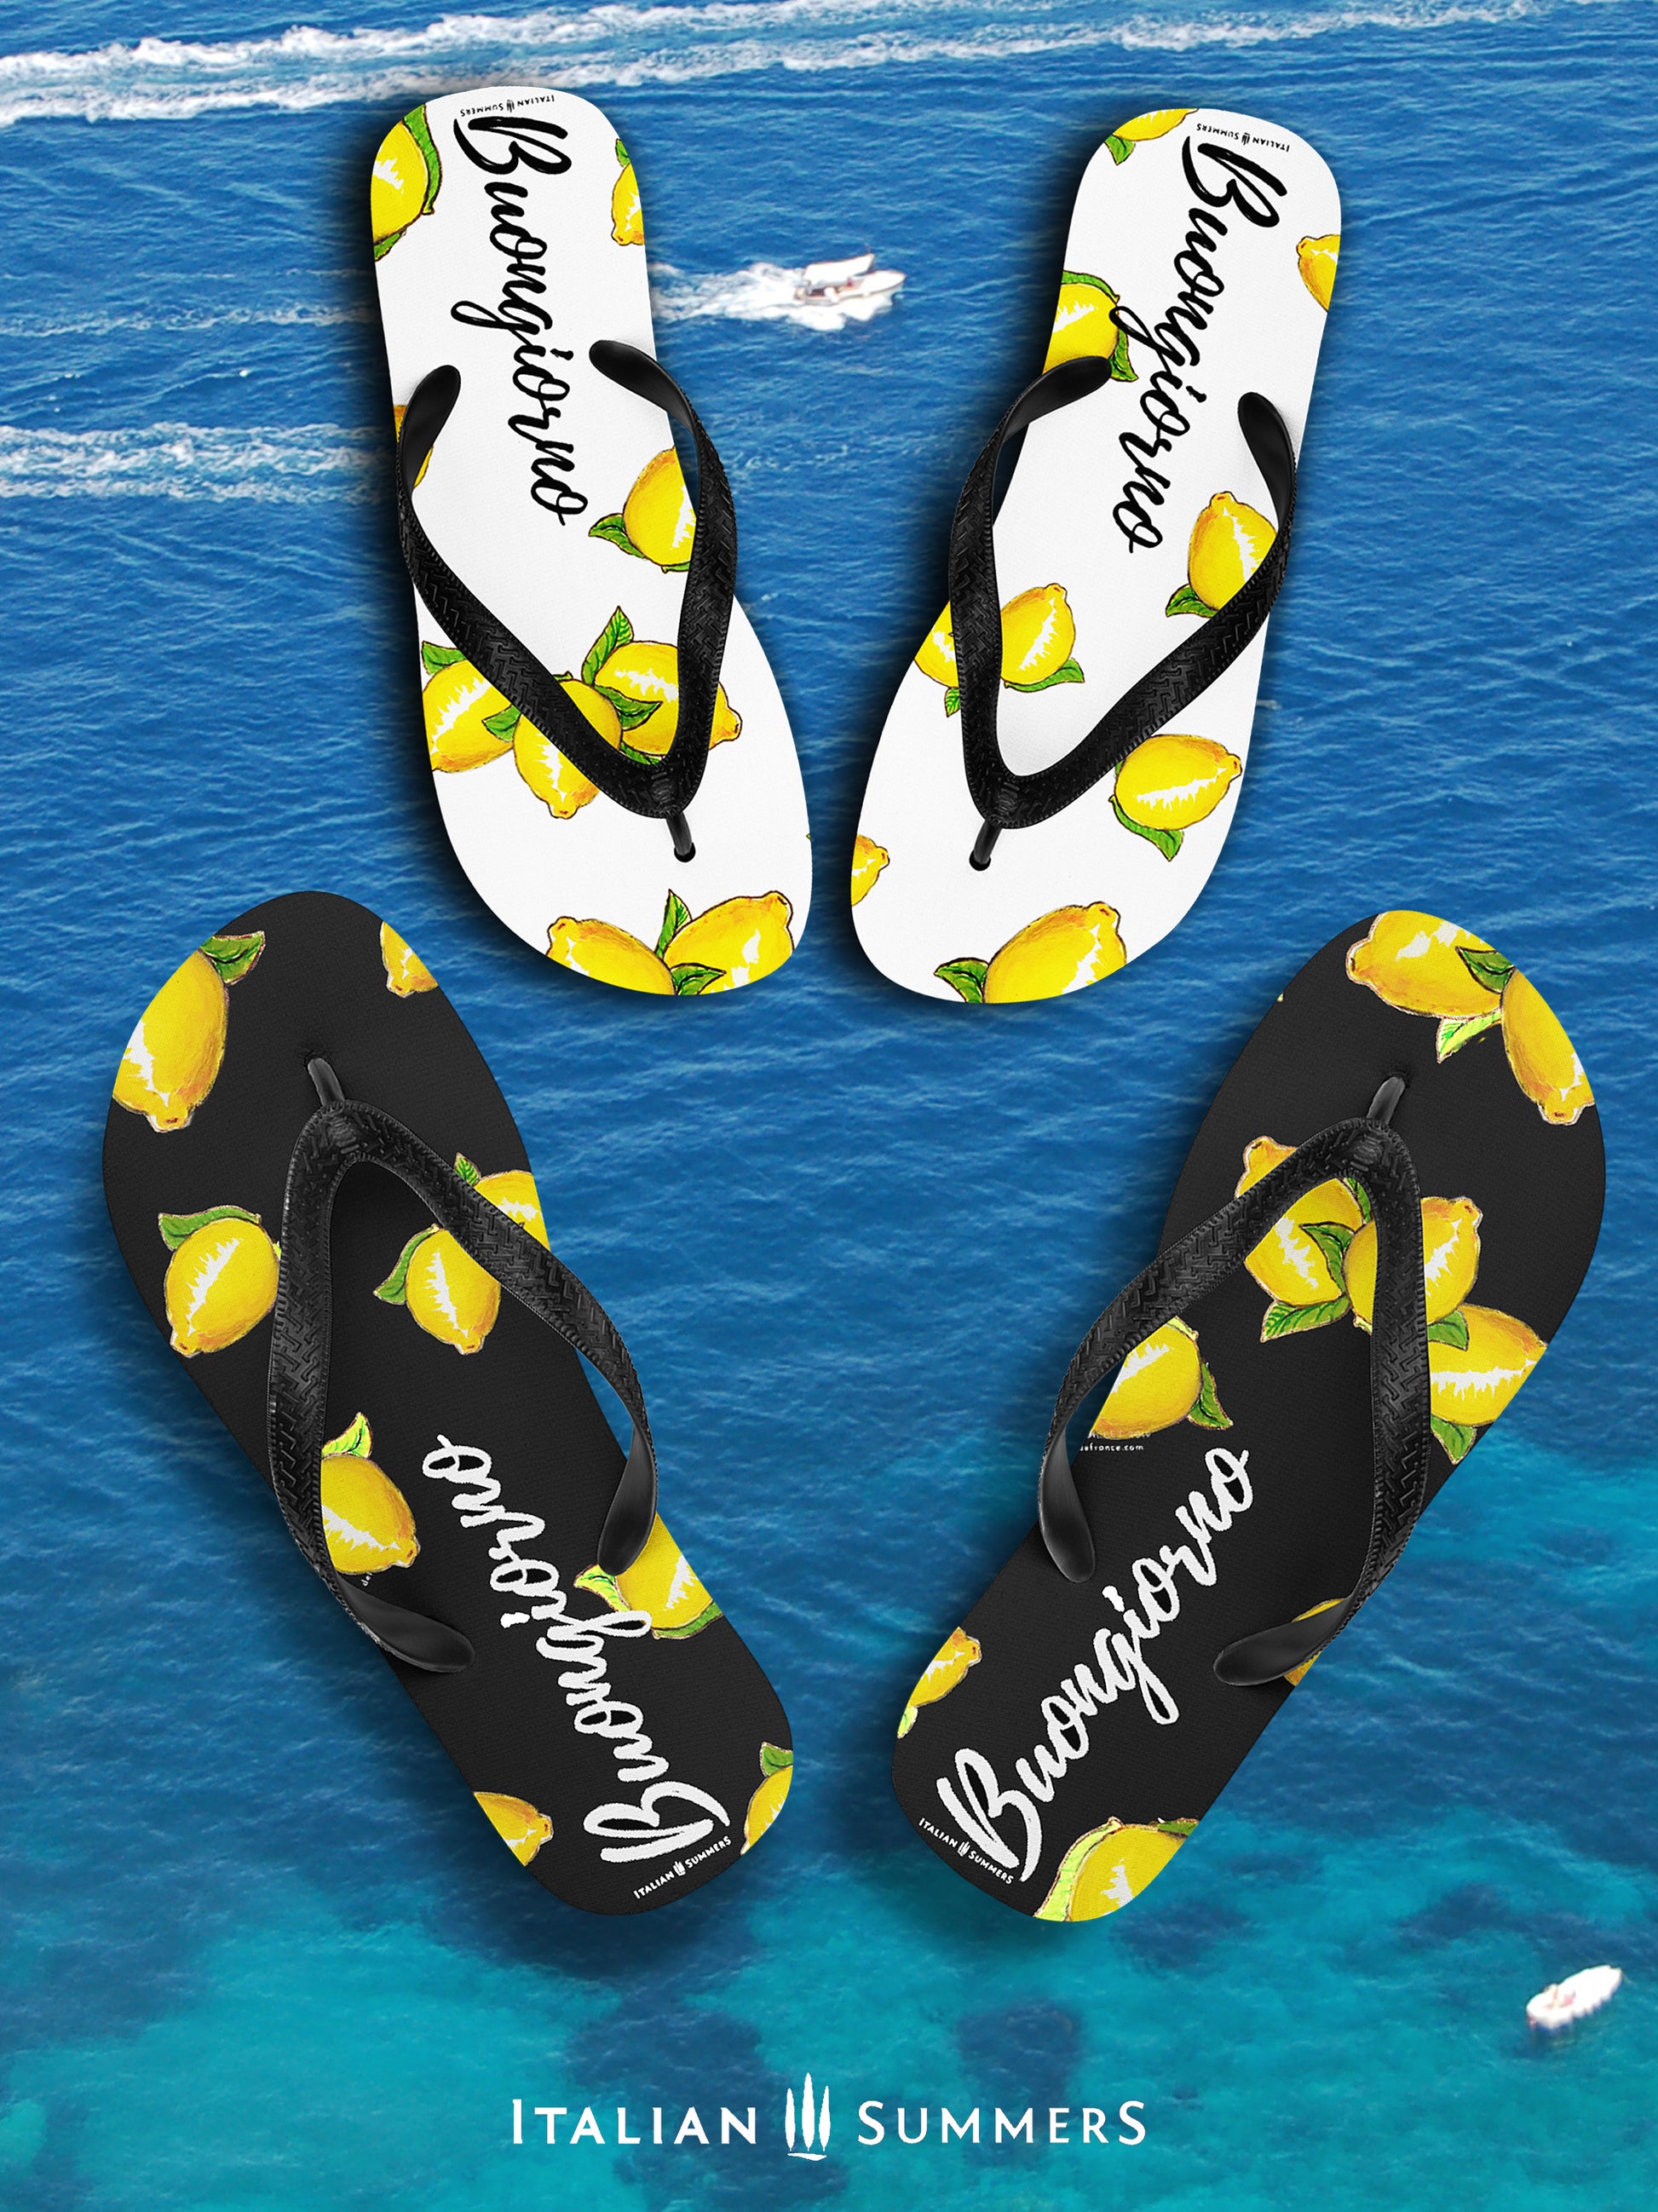 Slip into a pair of Buongiorno Limoni flip flops for a taste of Italy's sunny charm. Our stylish lemon-decorated flip flops bring the dolce vita to your next alfresco affair. Made by Italian Summers